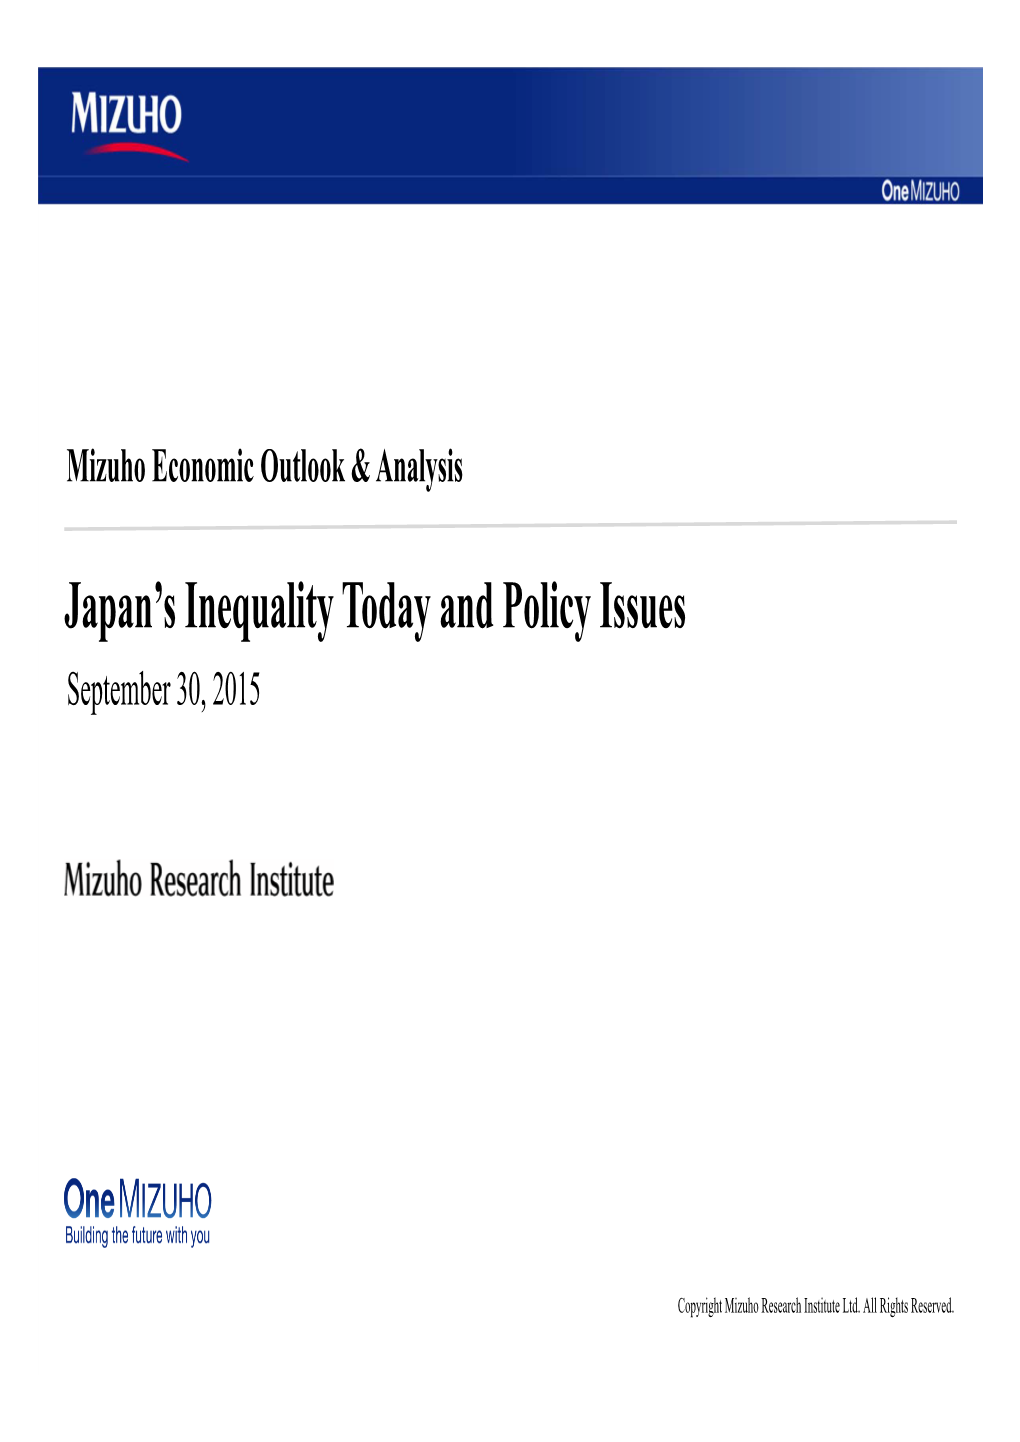 Japan's Inequality Today and Policy Issues